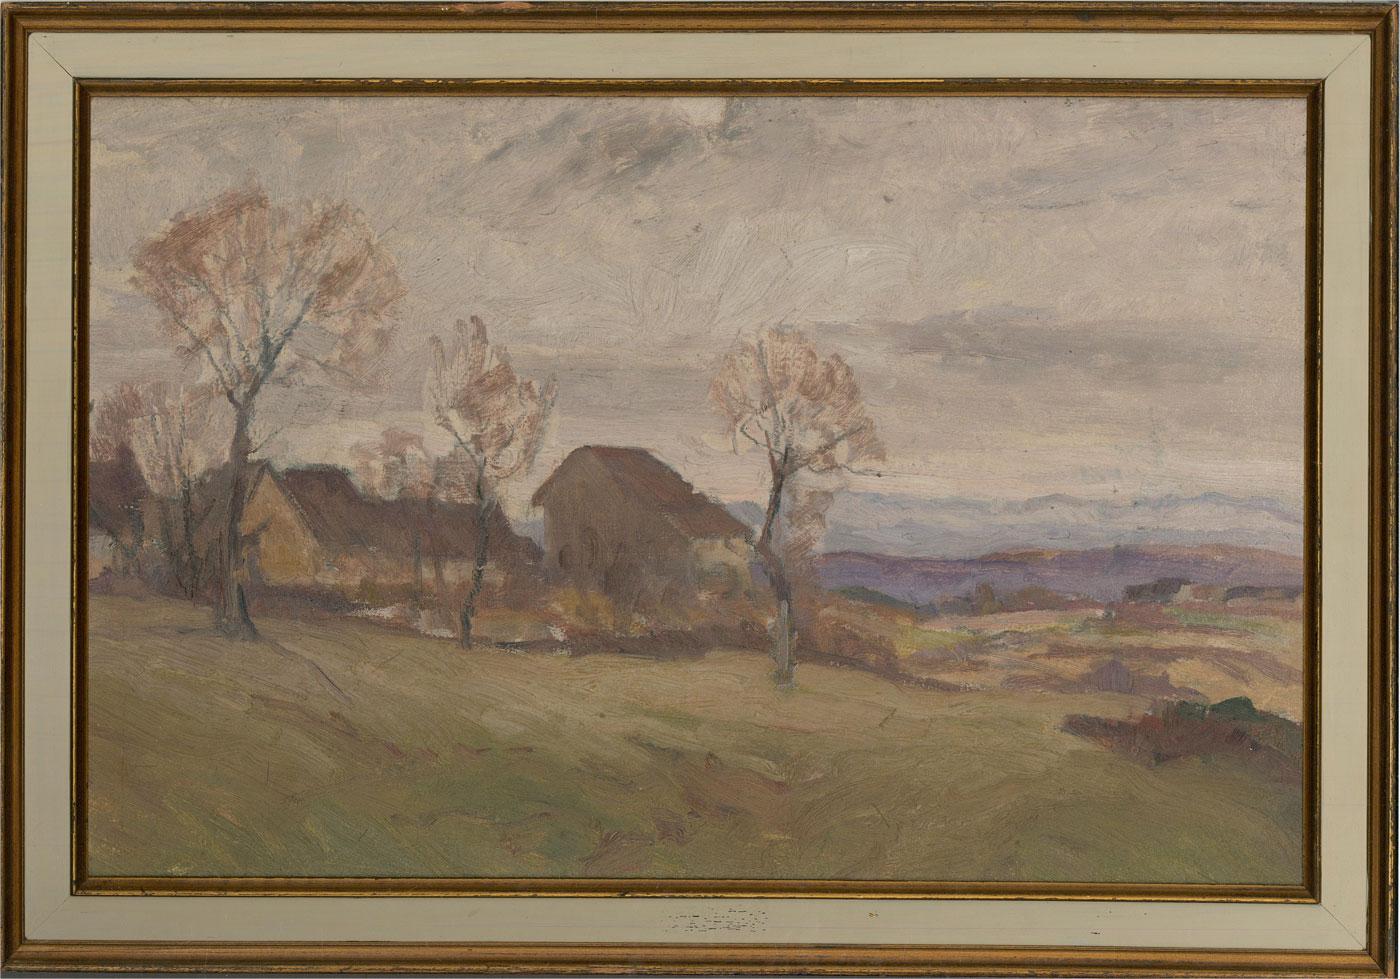 Unknown Landscape Painting - 20th Century Oil - Wintry Landscape with Cottages